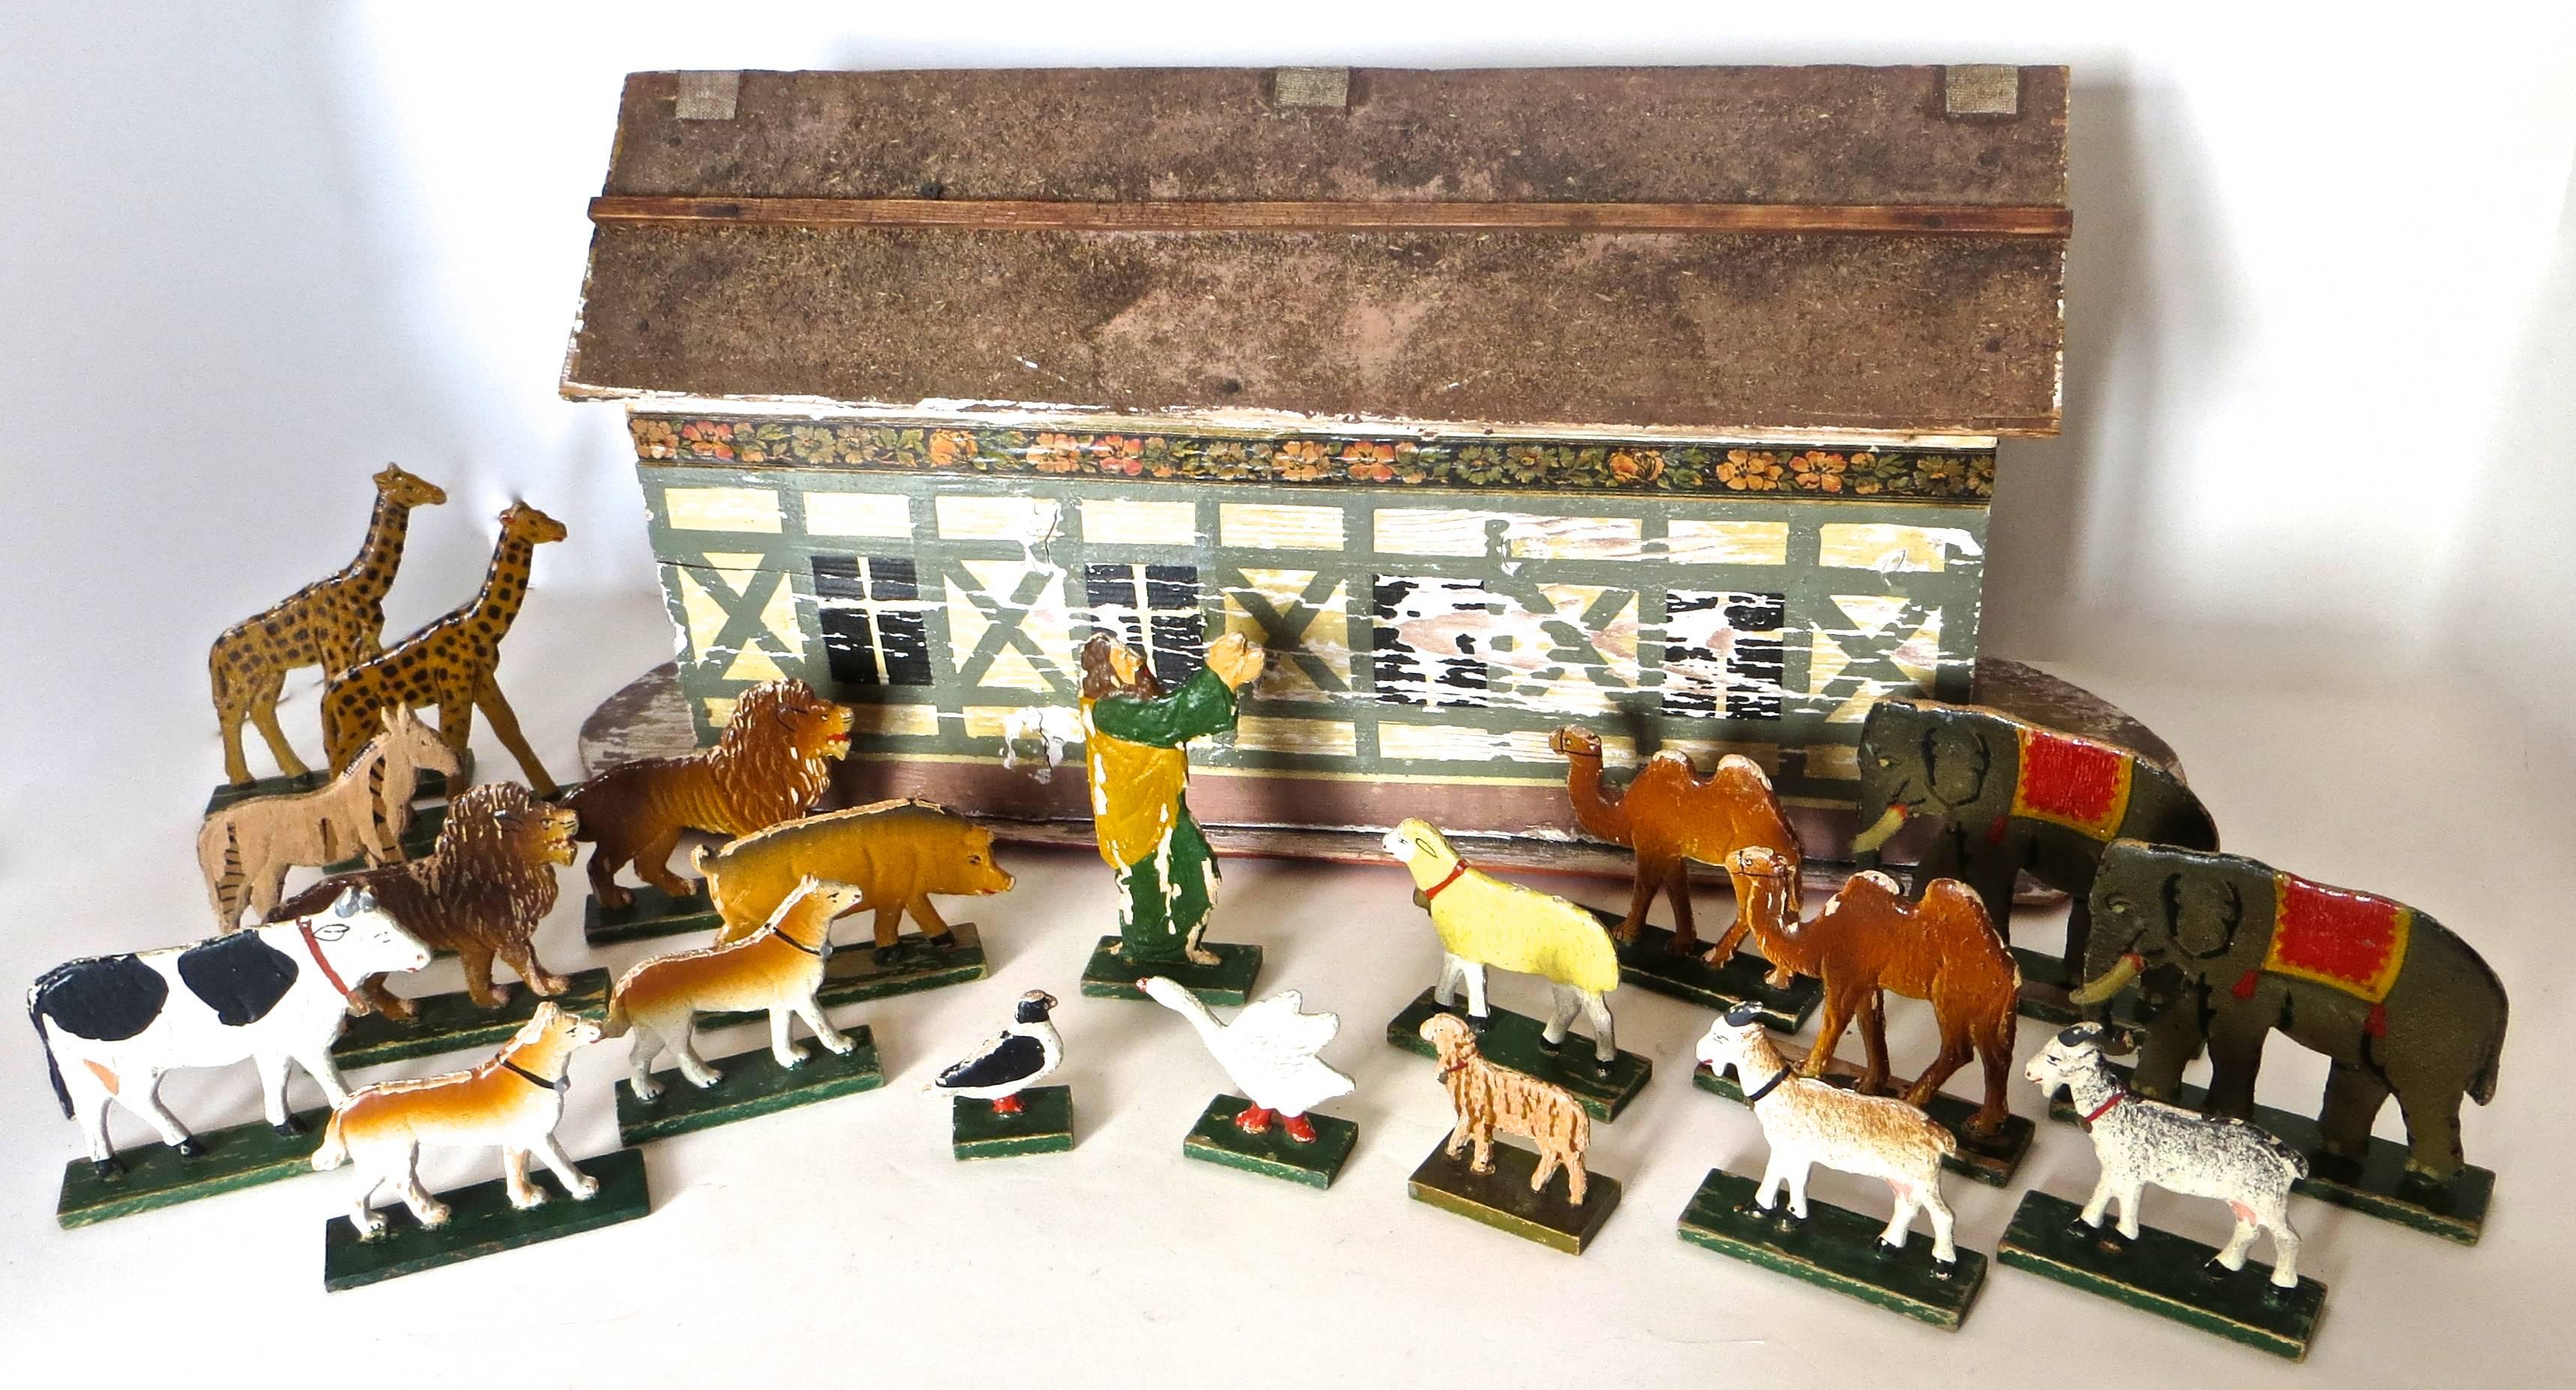 Hand-Crafted Late 19th Century Flat Bottom Toy Noah's Ark with 20 Animals, German